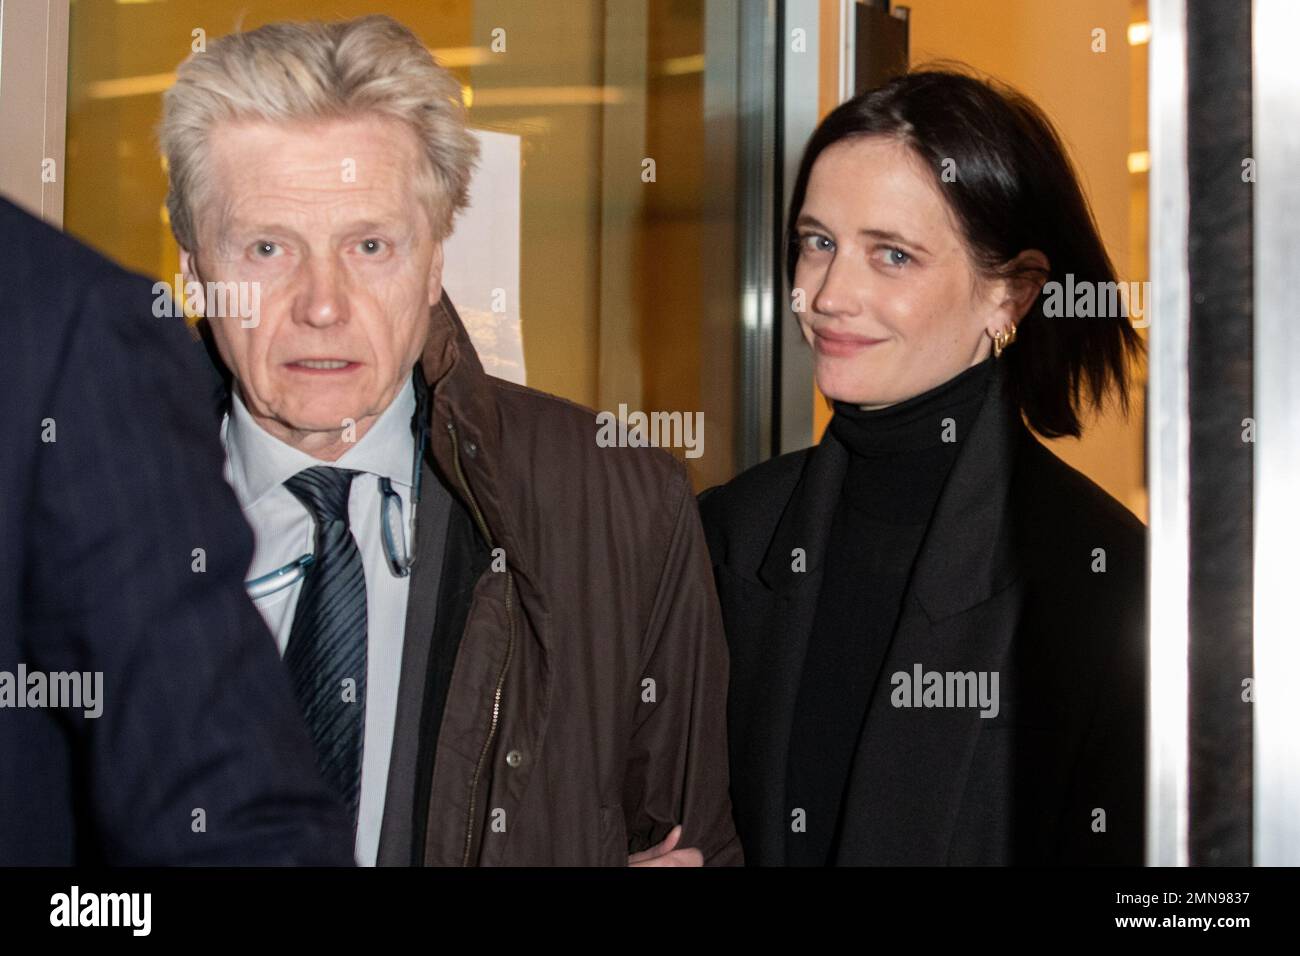 LONDON, 30th January 2023, Actress Eva Green leaves the Rolls Building after taking the witness box in legal action over multi-million-pound movie A Patriot. Credit: Lucy North/Alamy Live News Stock Photo